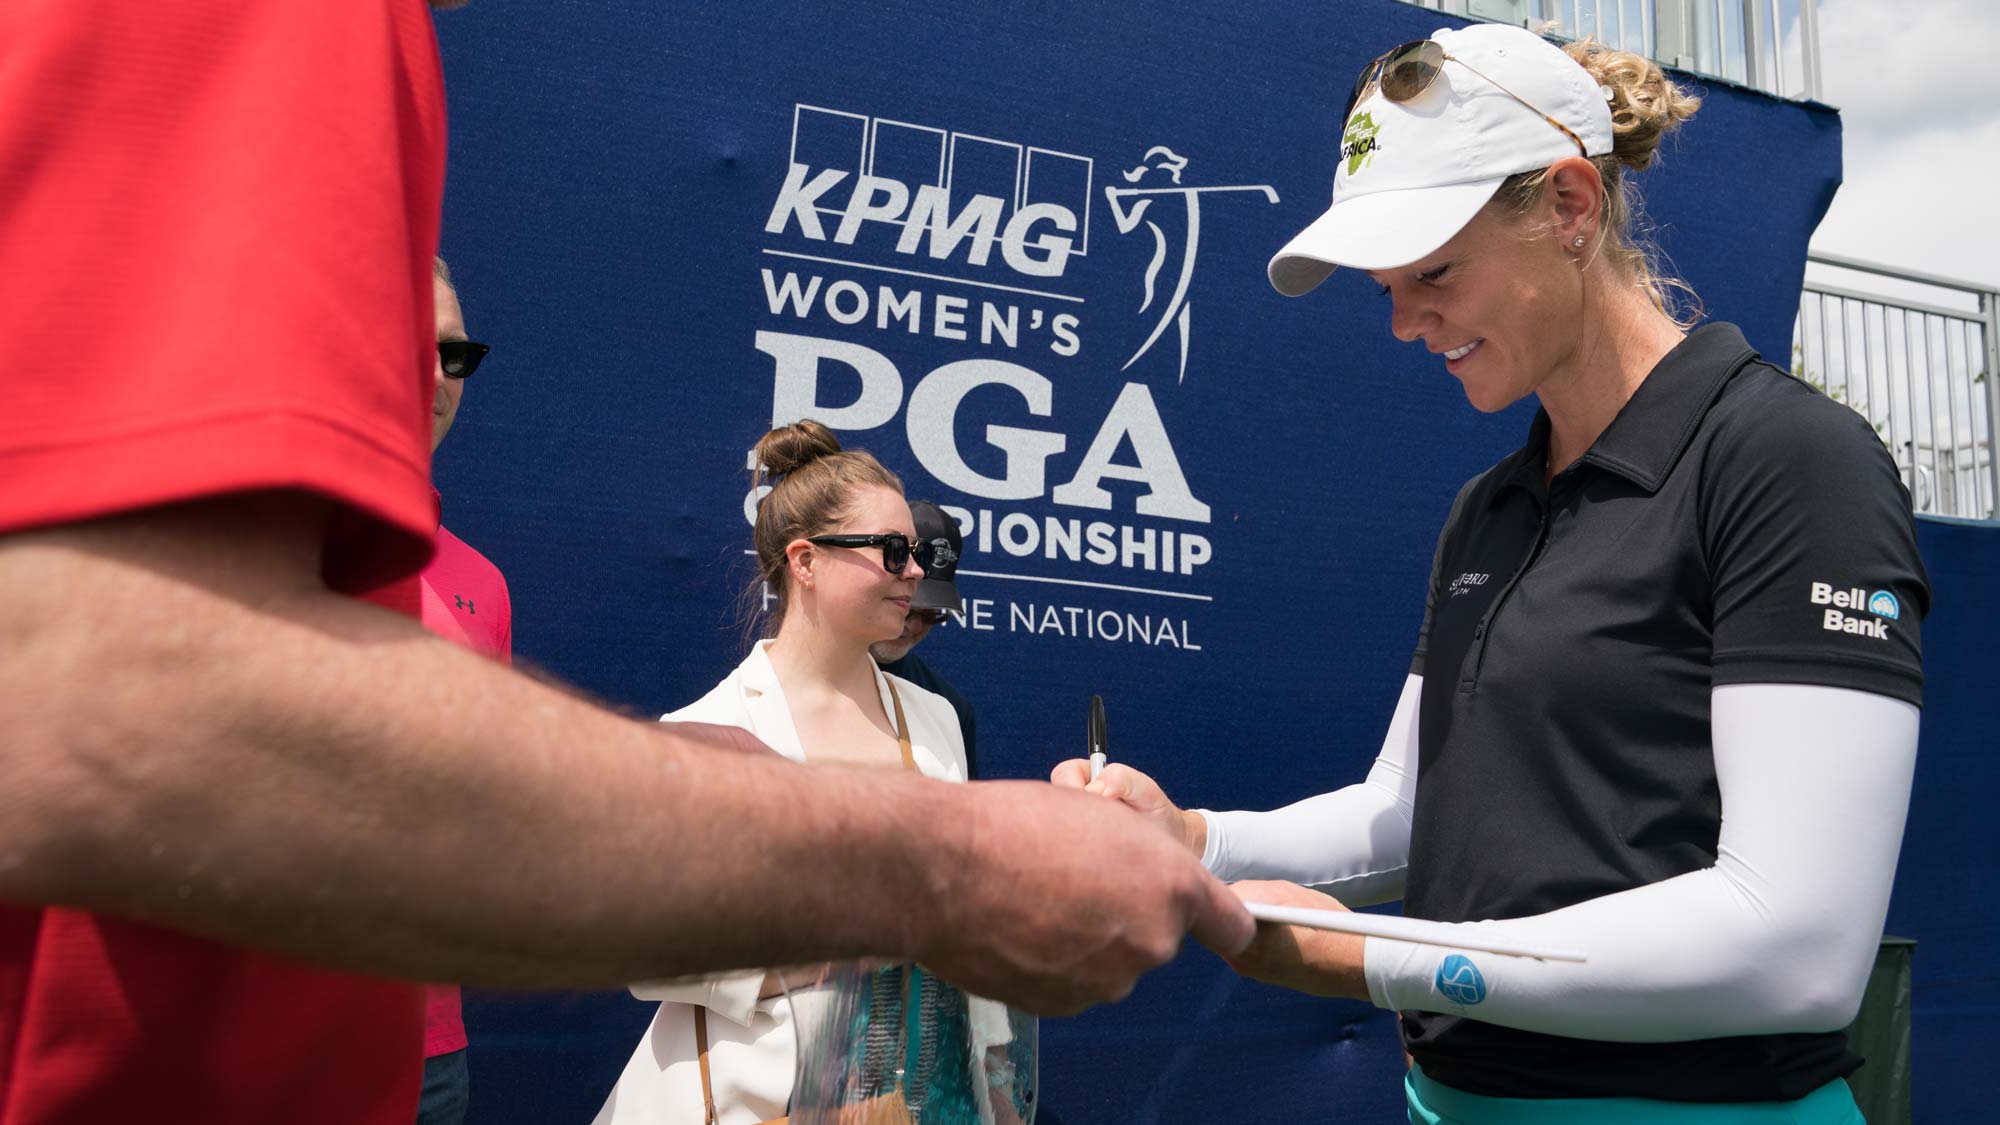 Amy Olson signs autographs during the practice round for the 65th KPMG Women’s PGA Championship